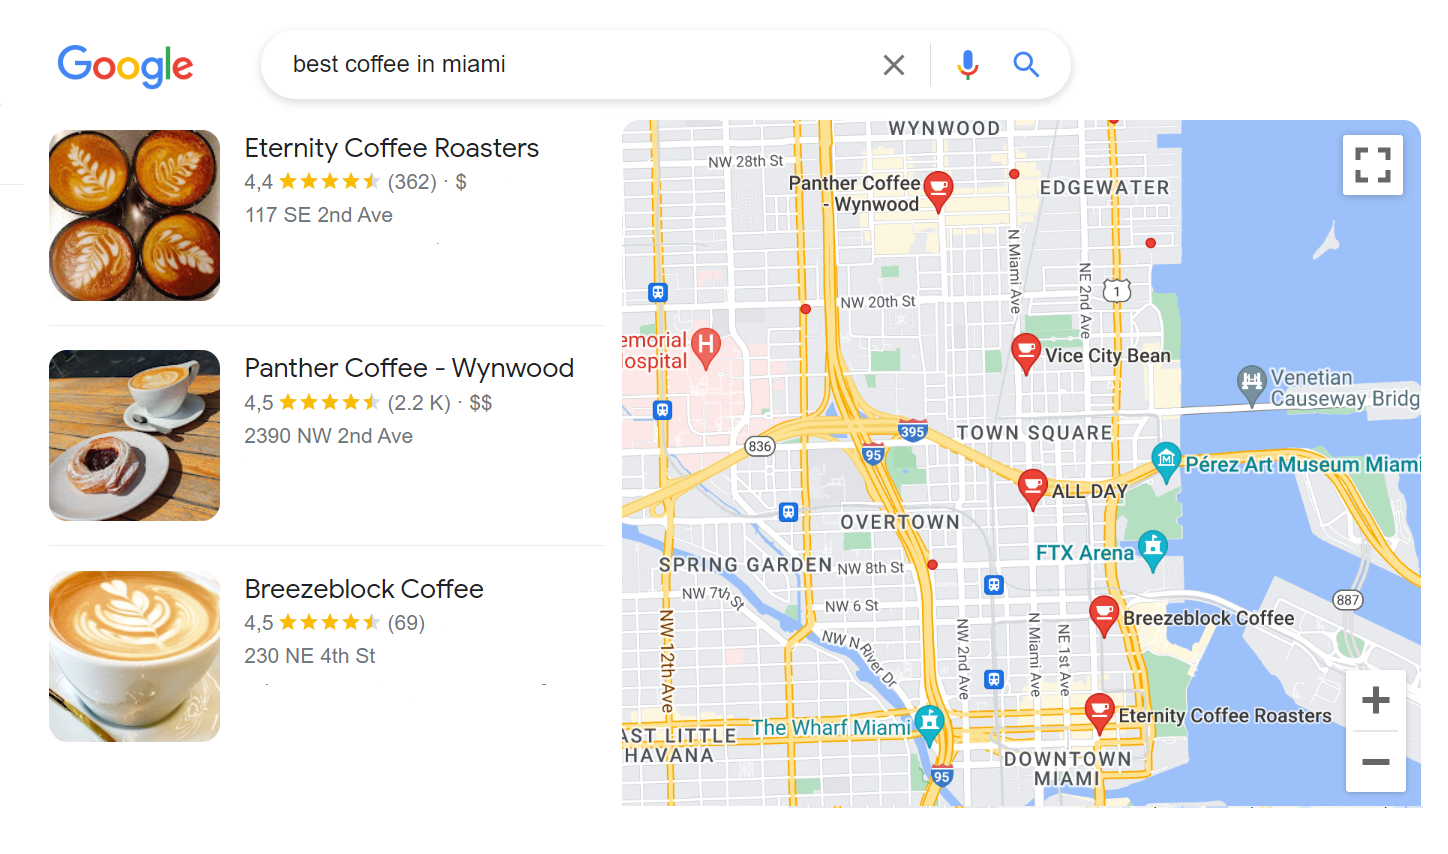 An image showing how Google local search appears in Google Search 